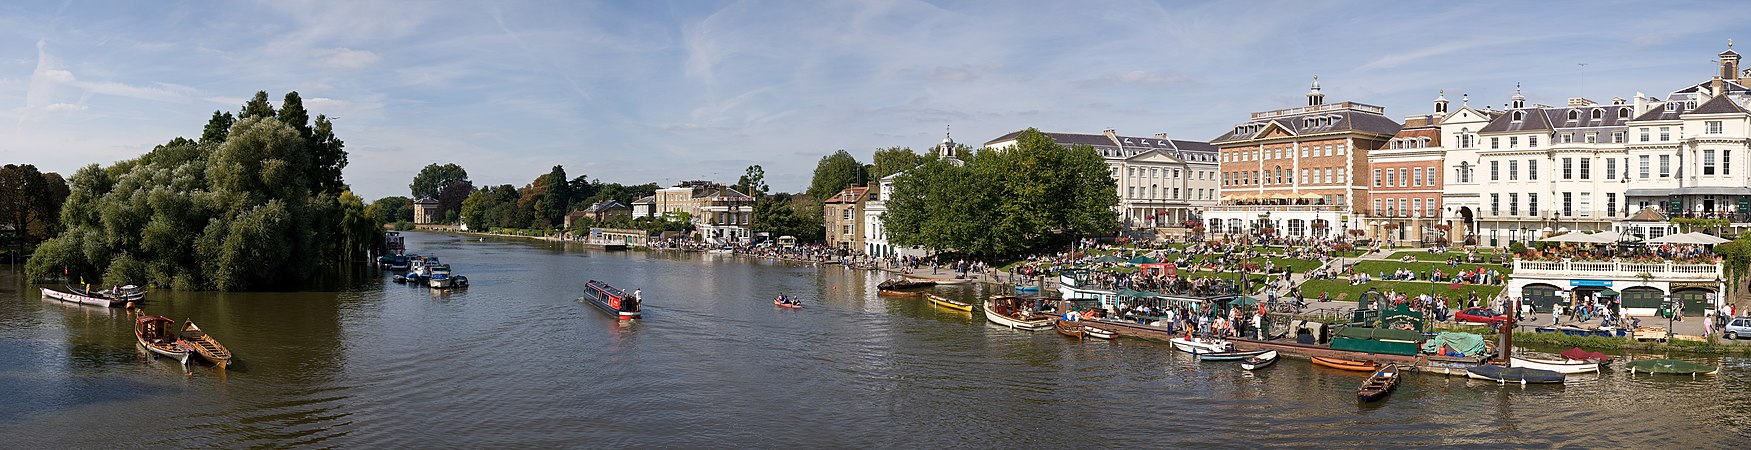 Thames River at Richmond, London, by Diliff